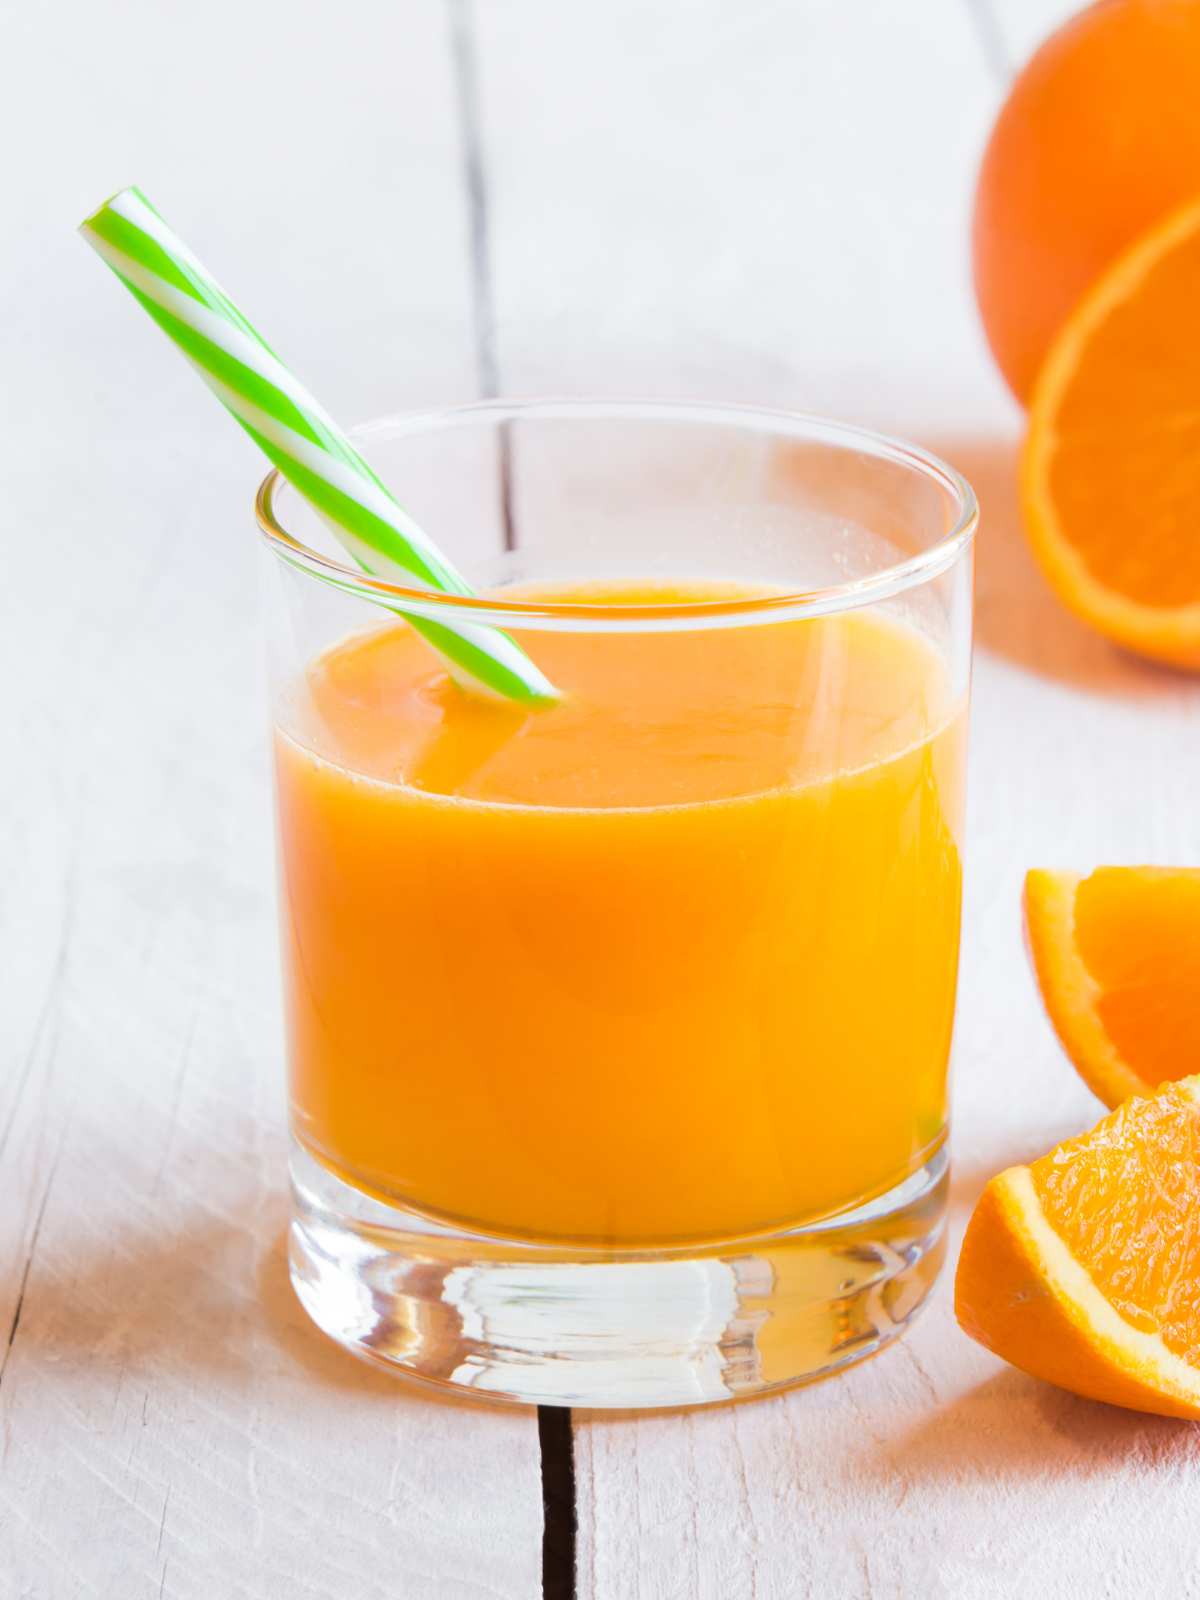 A glass of freshly made orange juice with a straw next to slices of oranges.